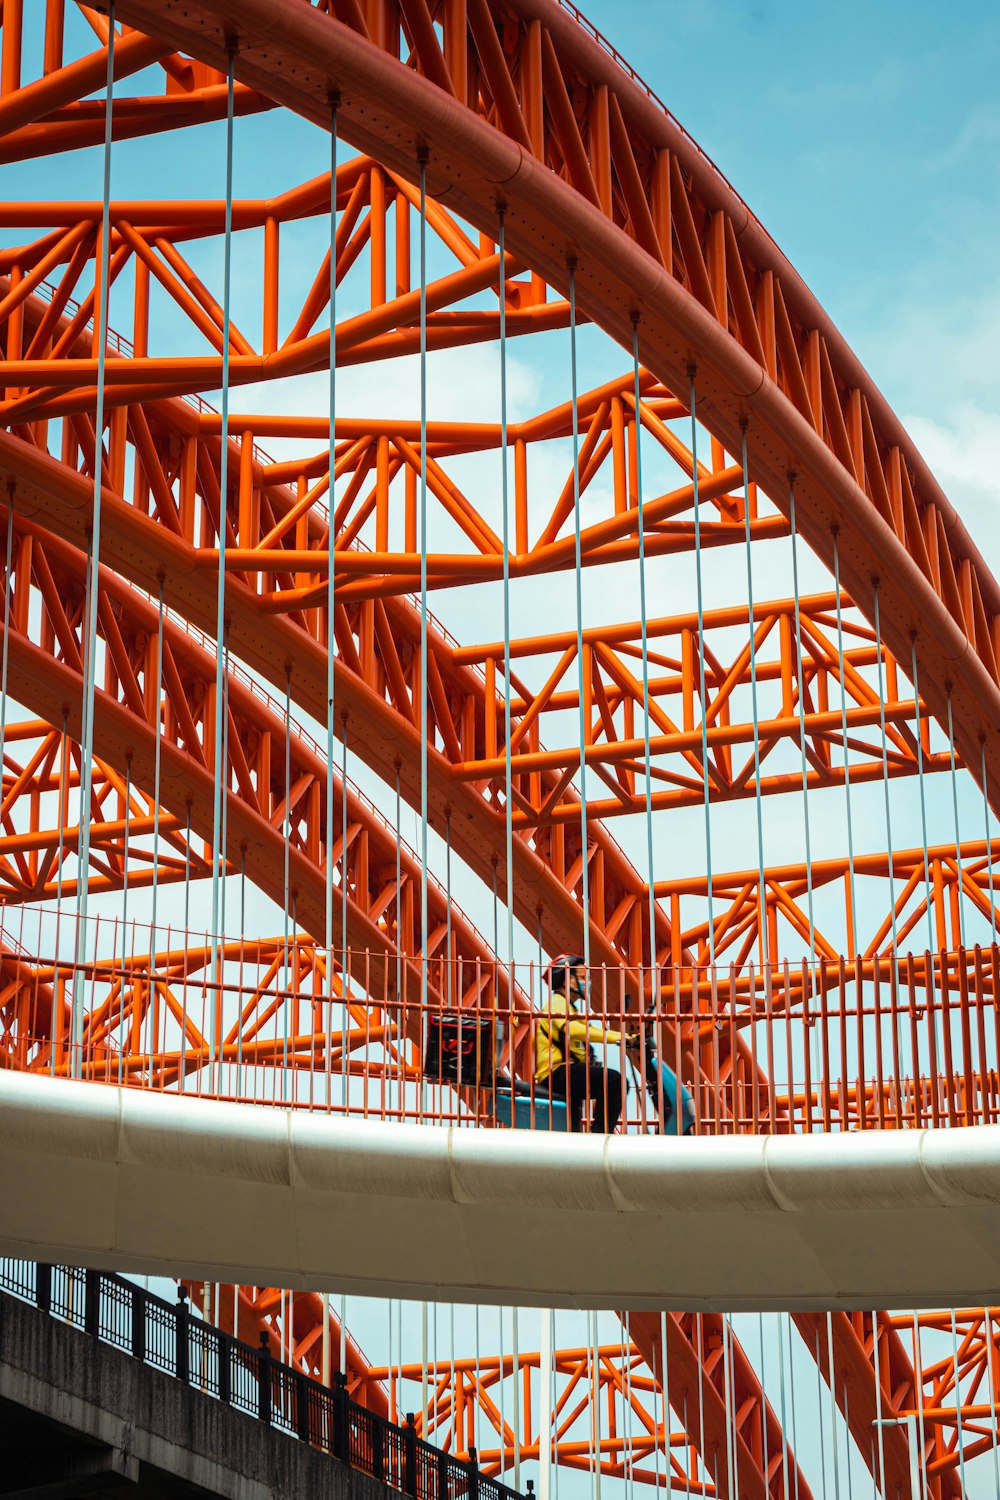 a man standing on a bridge with an orange structure in the background